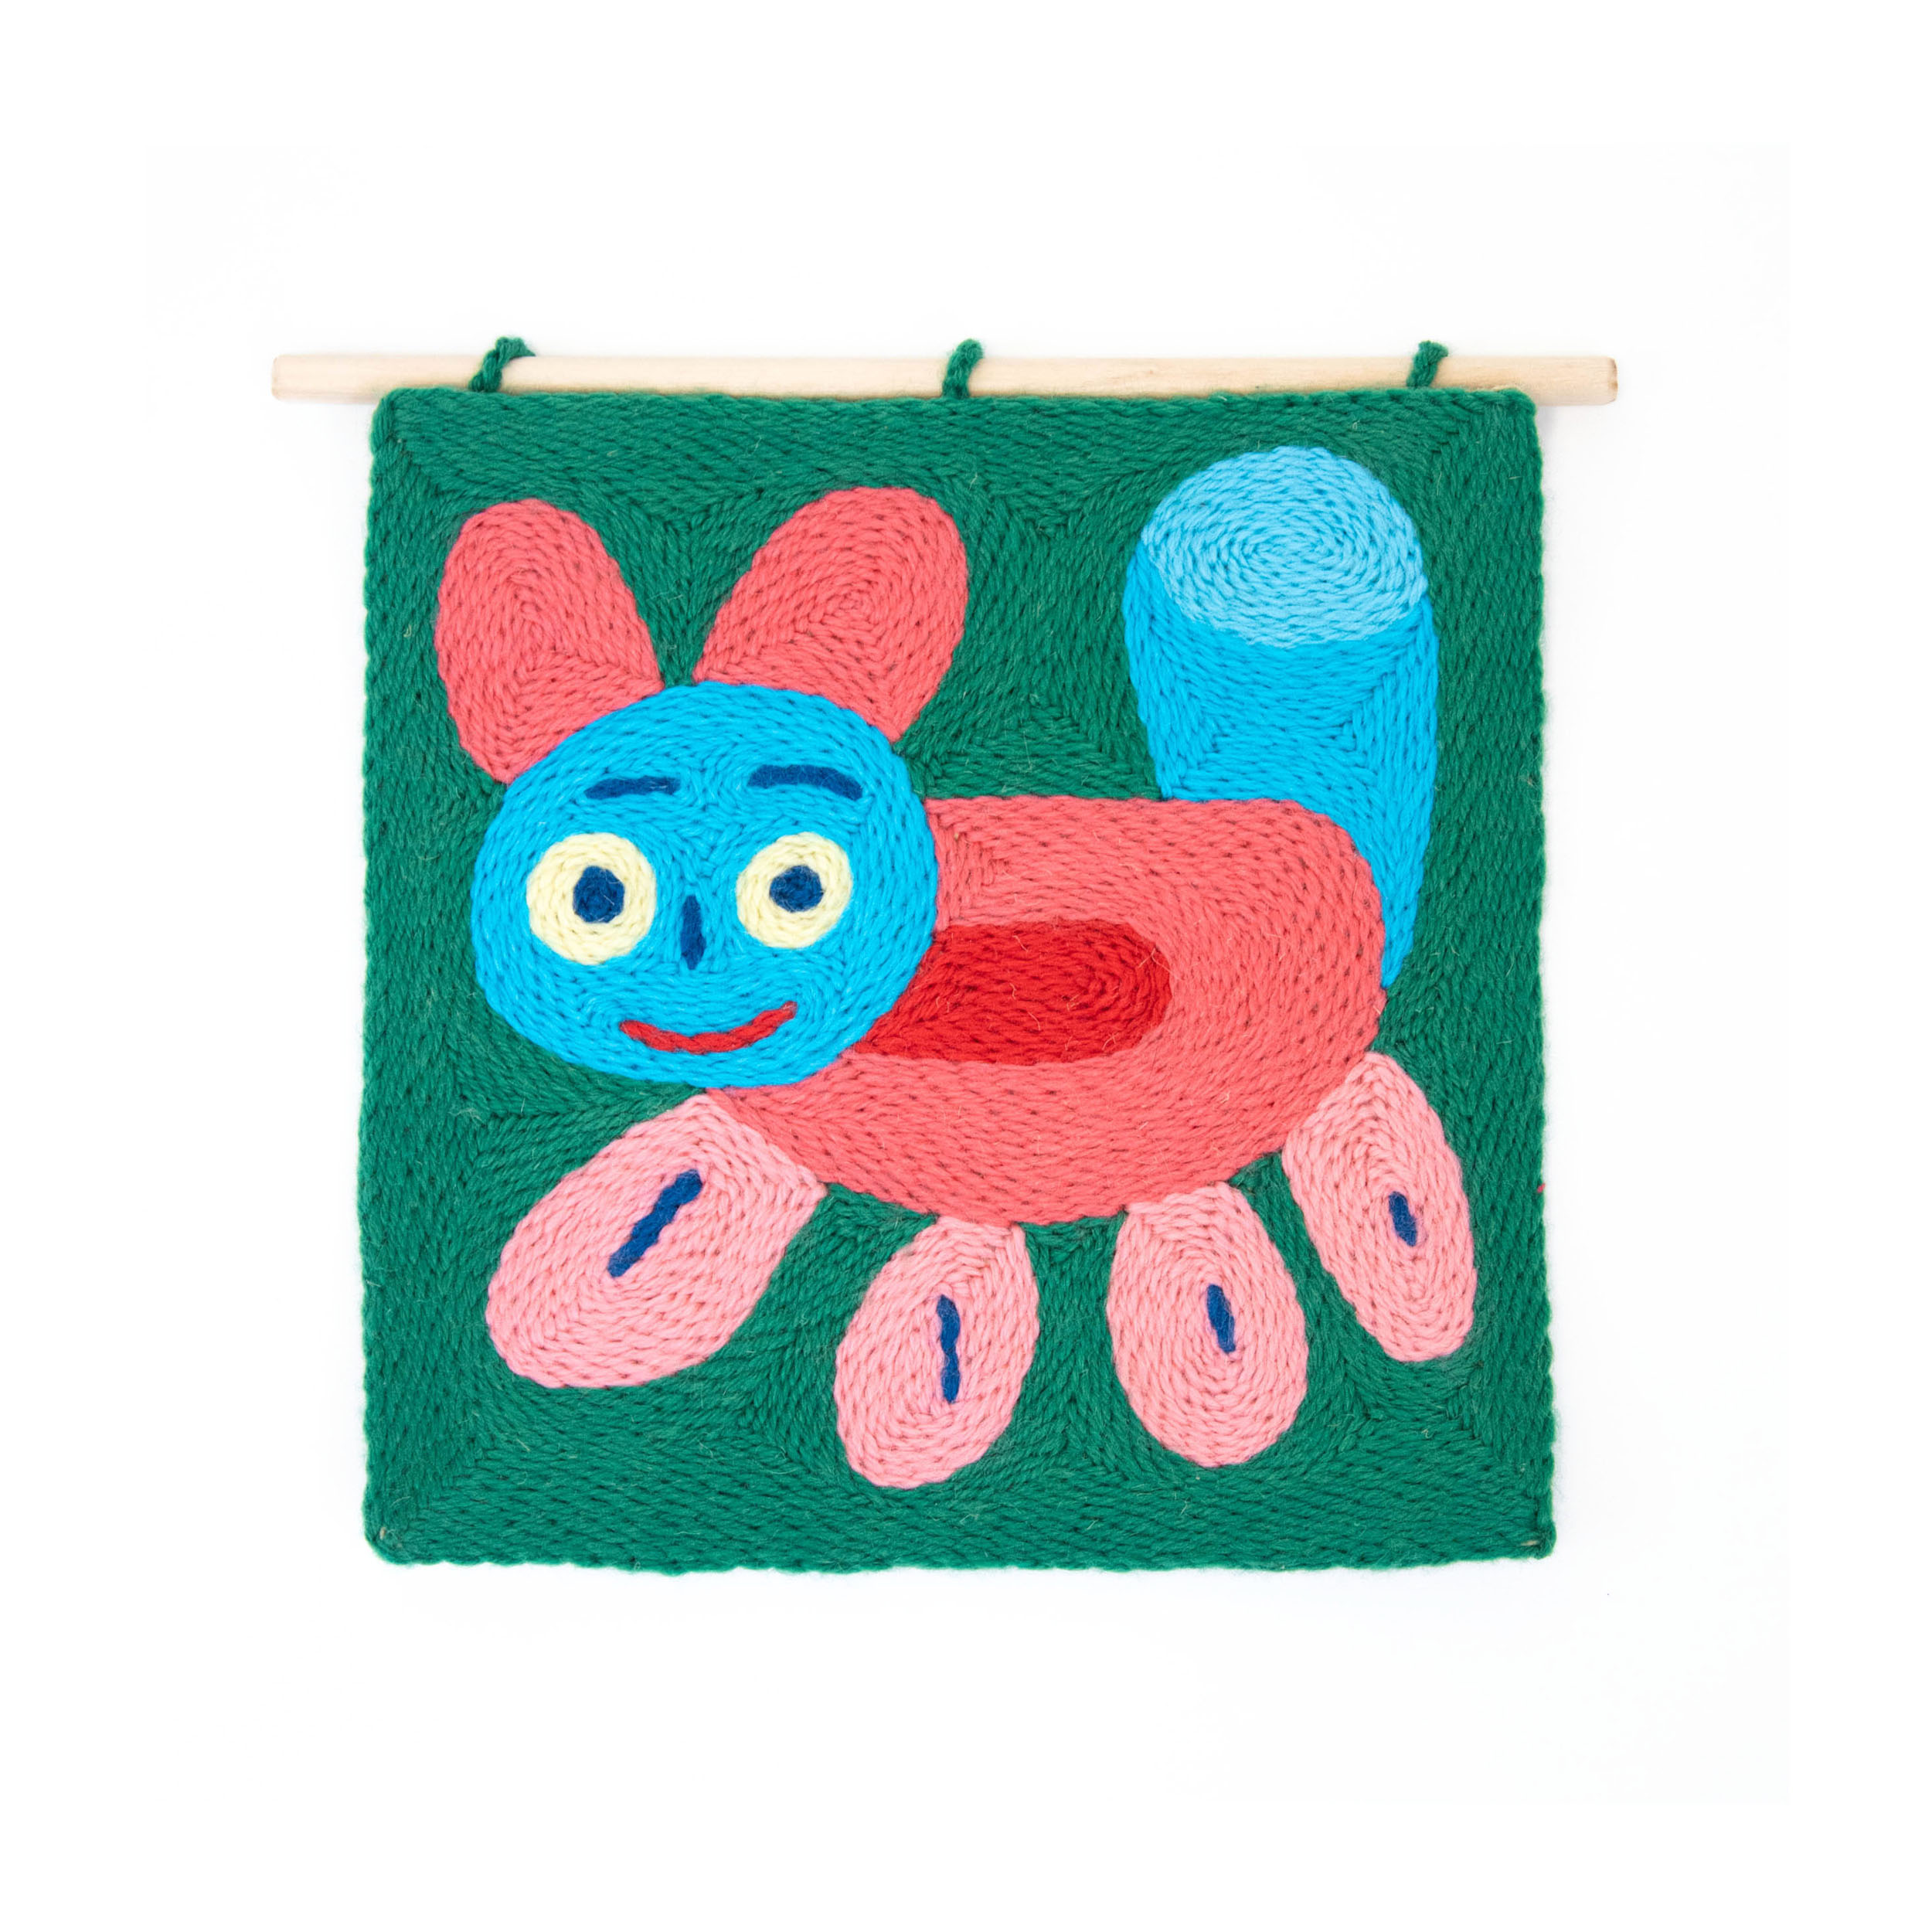 Small size embroideries